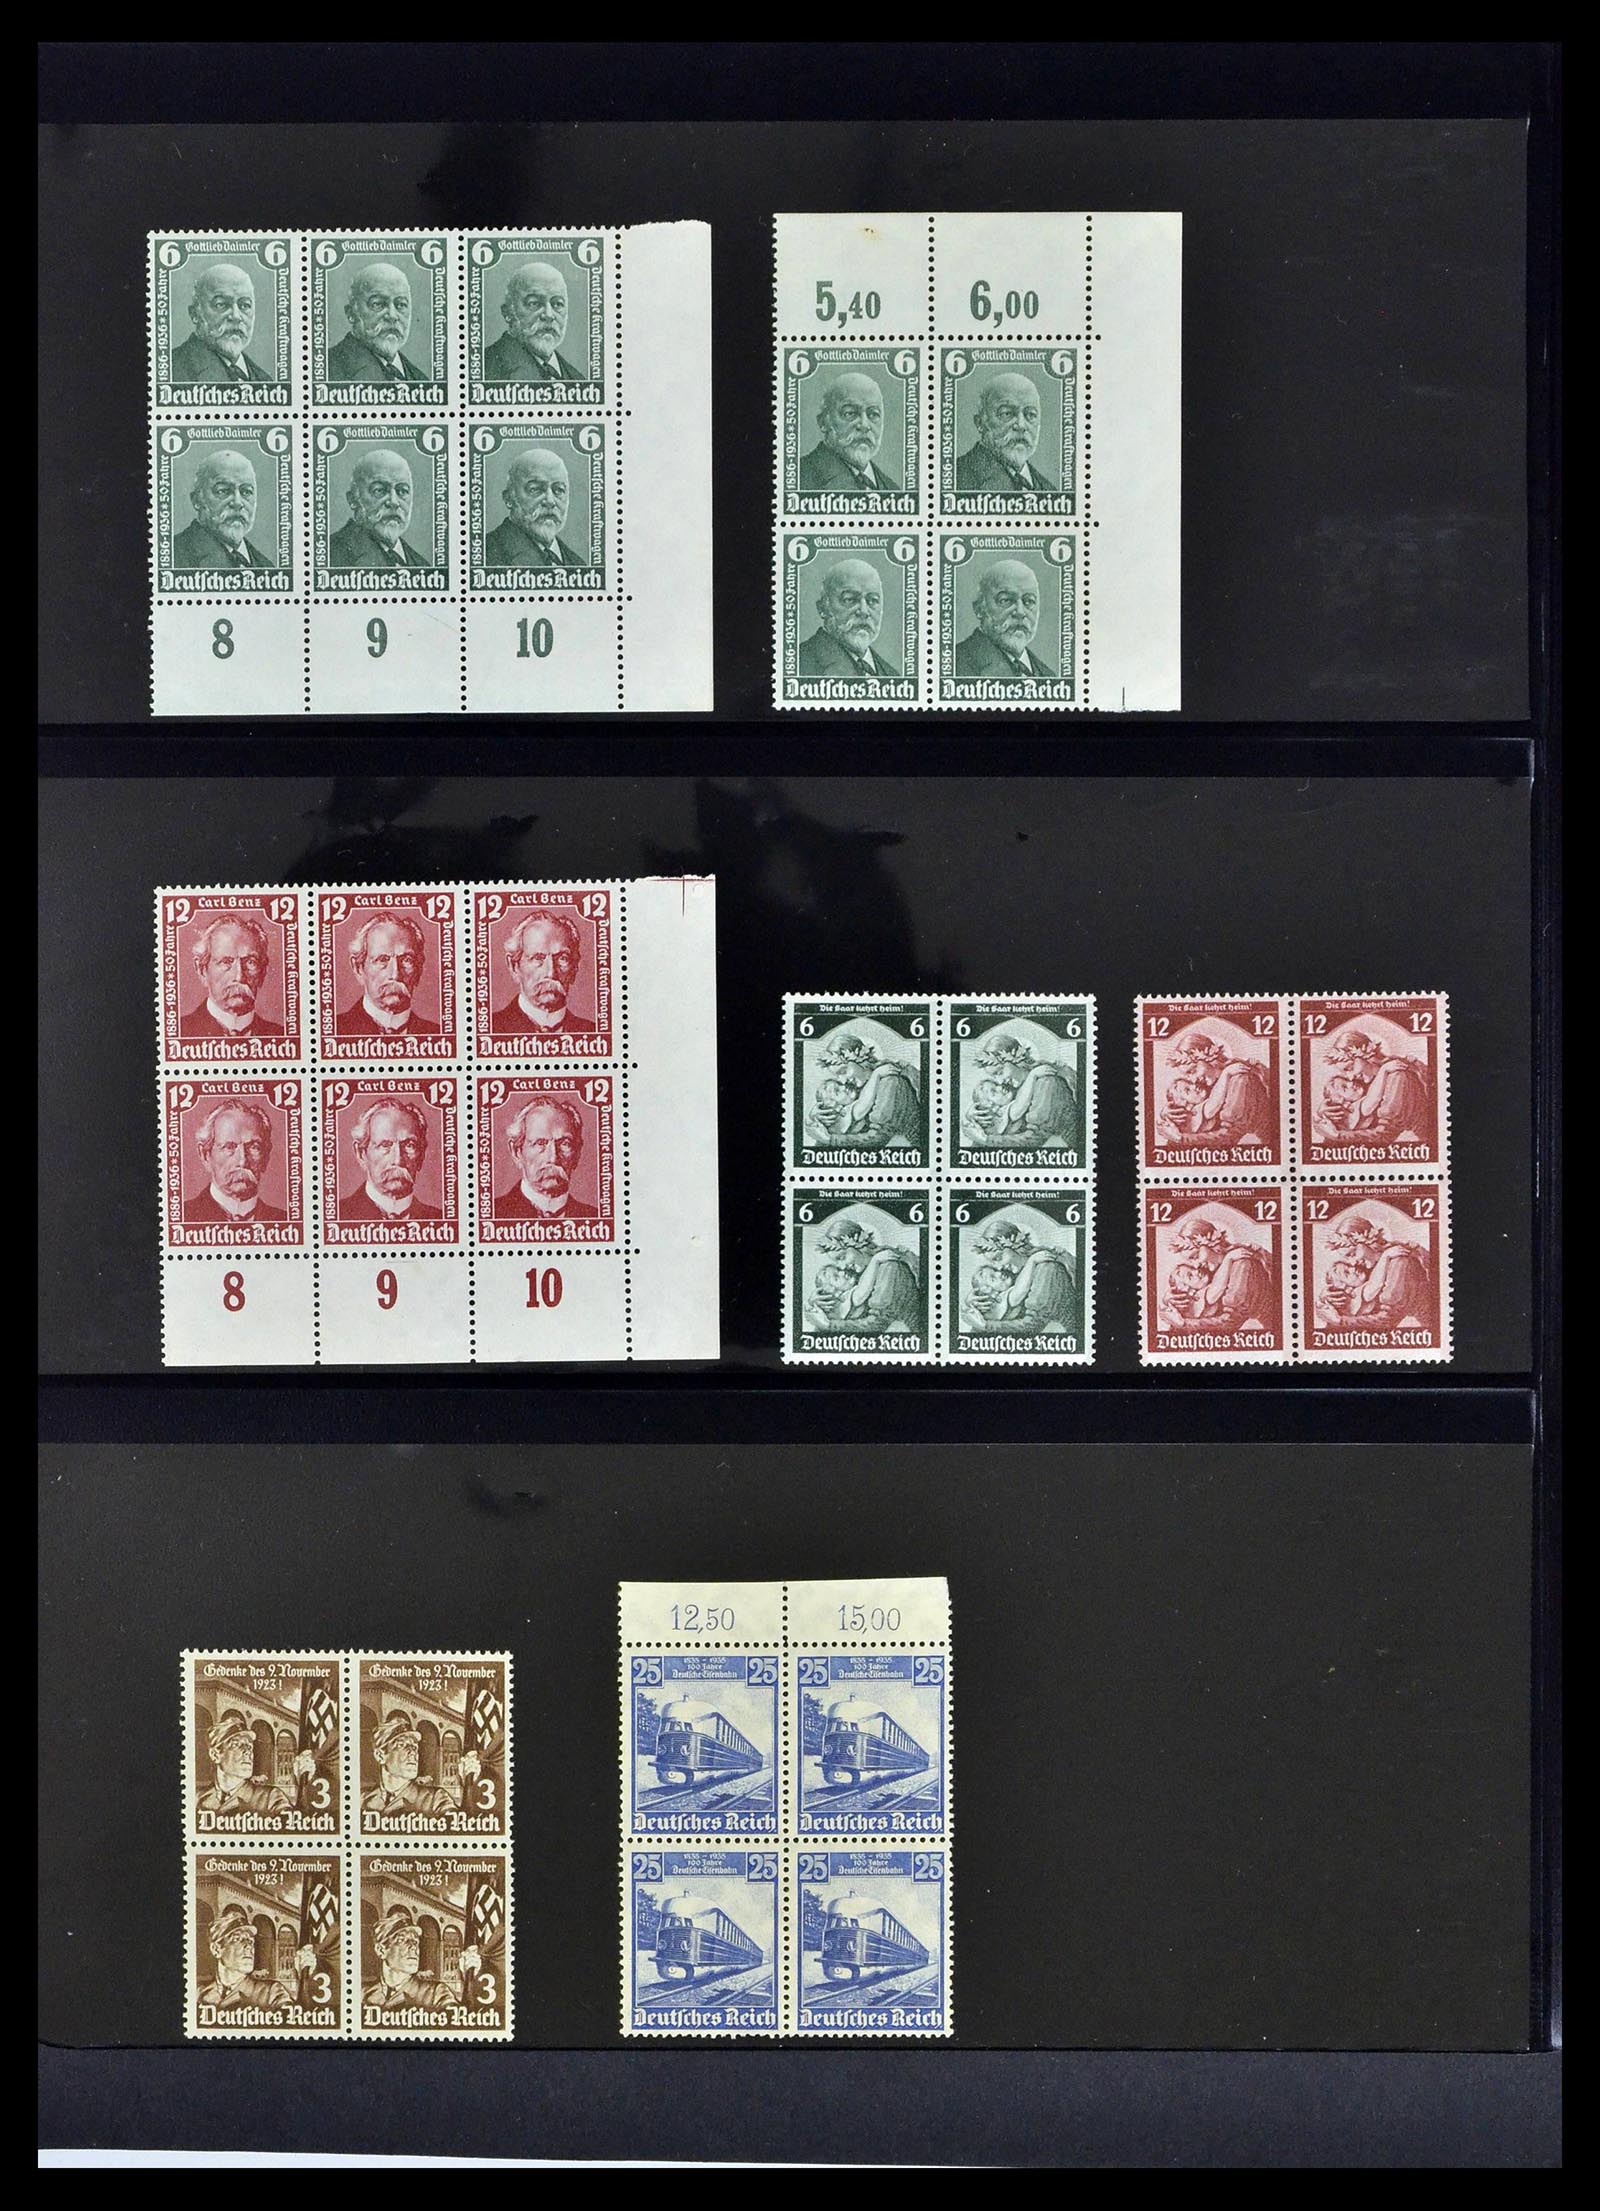 39255 0034 - Stamp collection 39255 German Reich MNH blocks of 4.